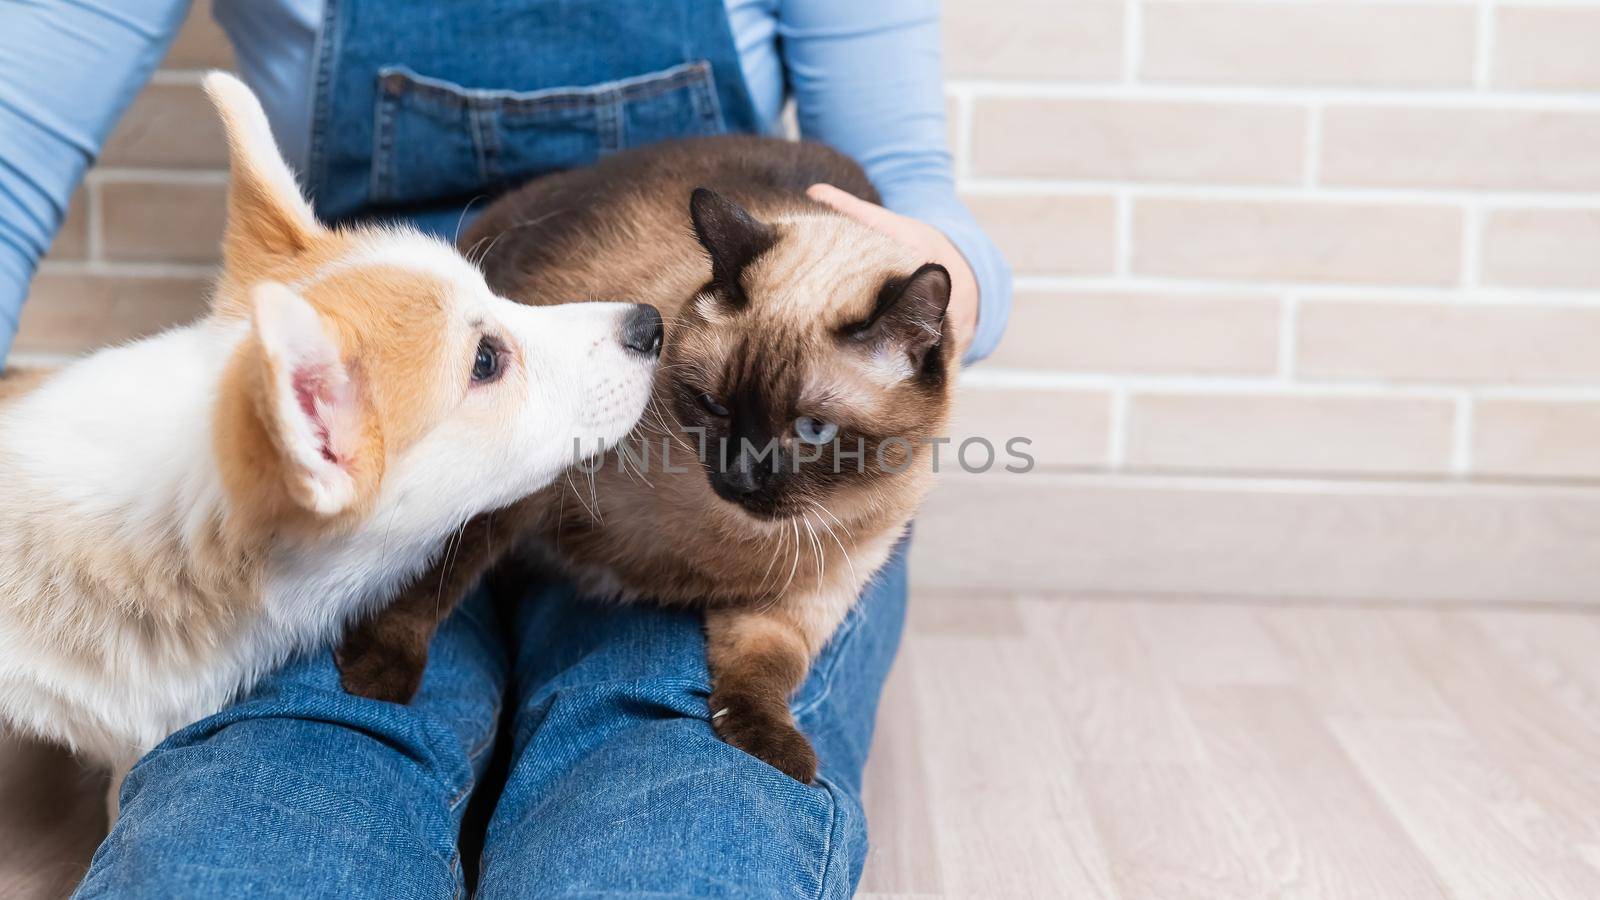 A woman is holding a Thai cat and a Welsh Corgi puppy